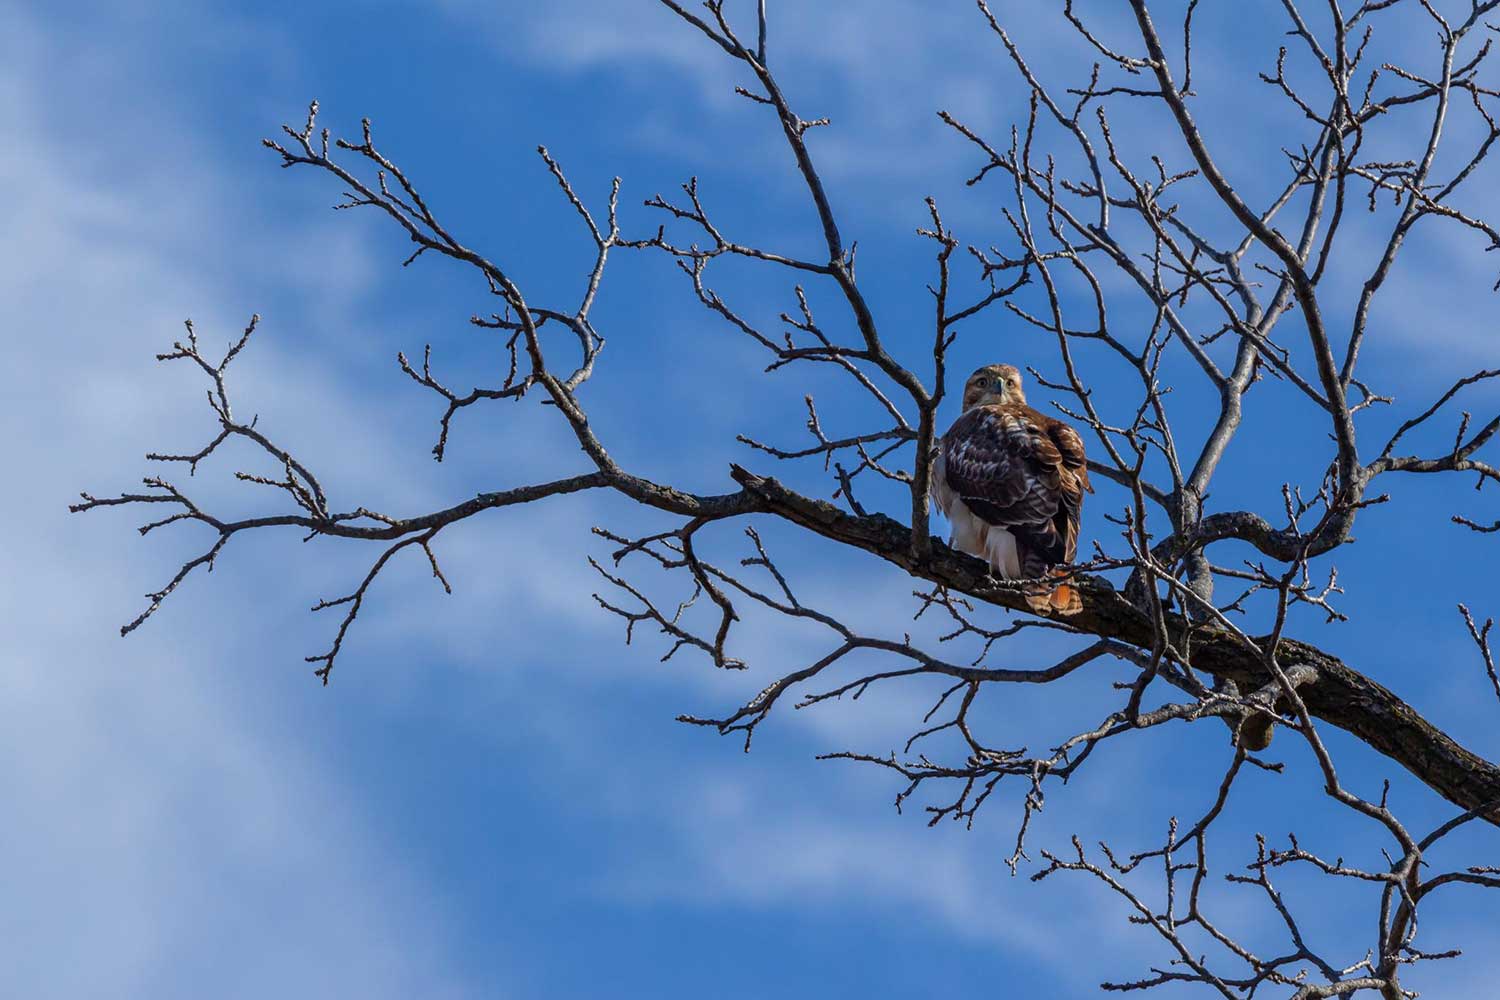 A red-tailed hawk perched on a bare tree branch with a blue sky and thin clouds in the background.